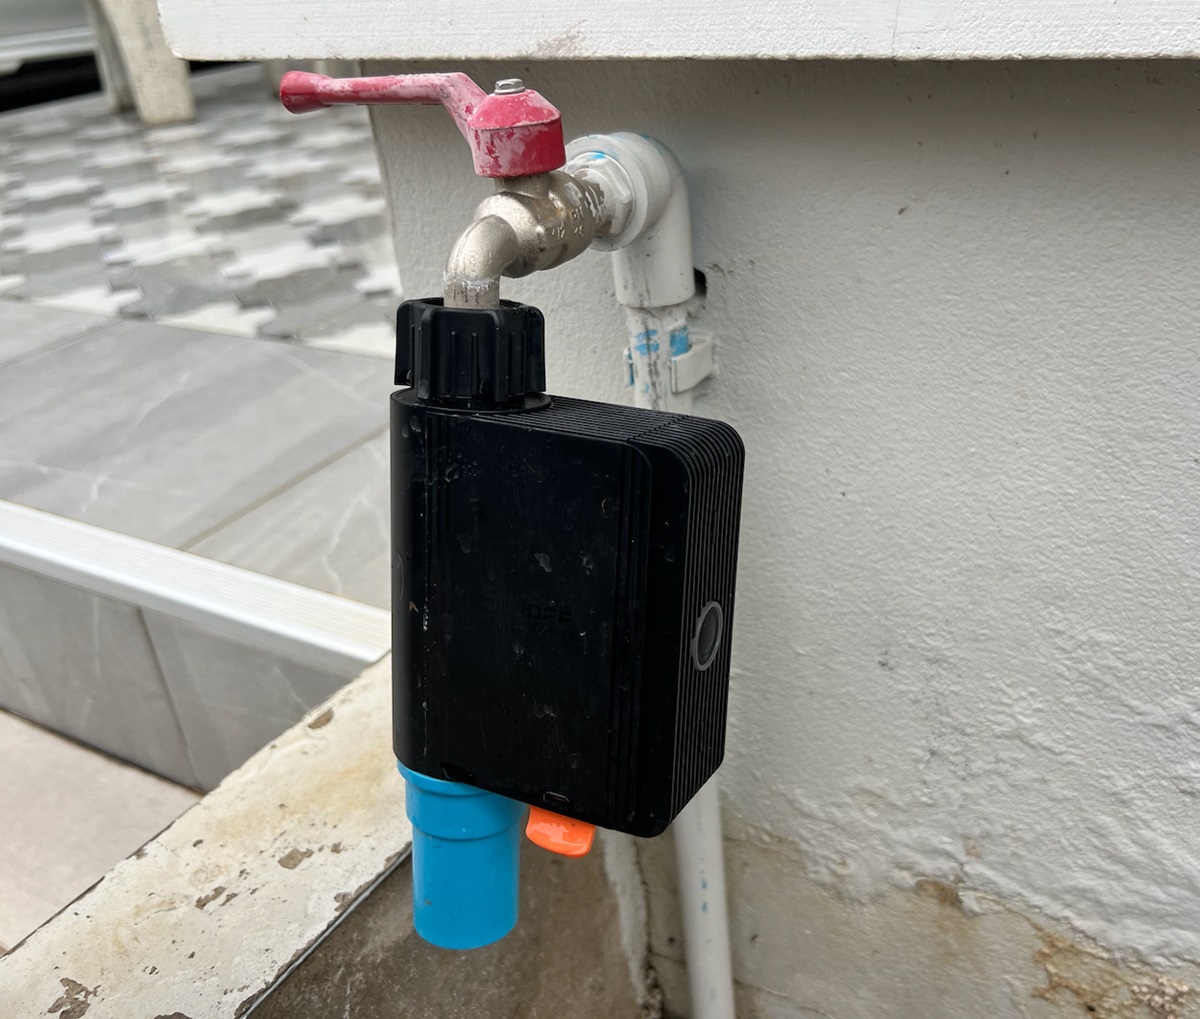 SONOFF SWV Smart Water Valve review